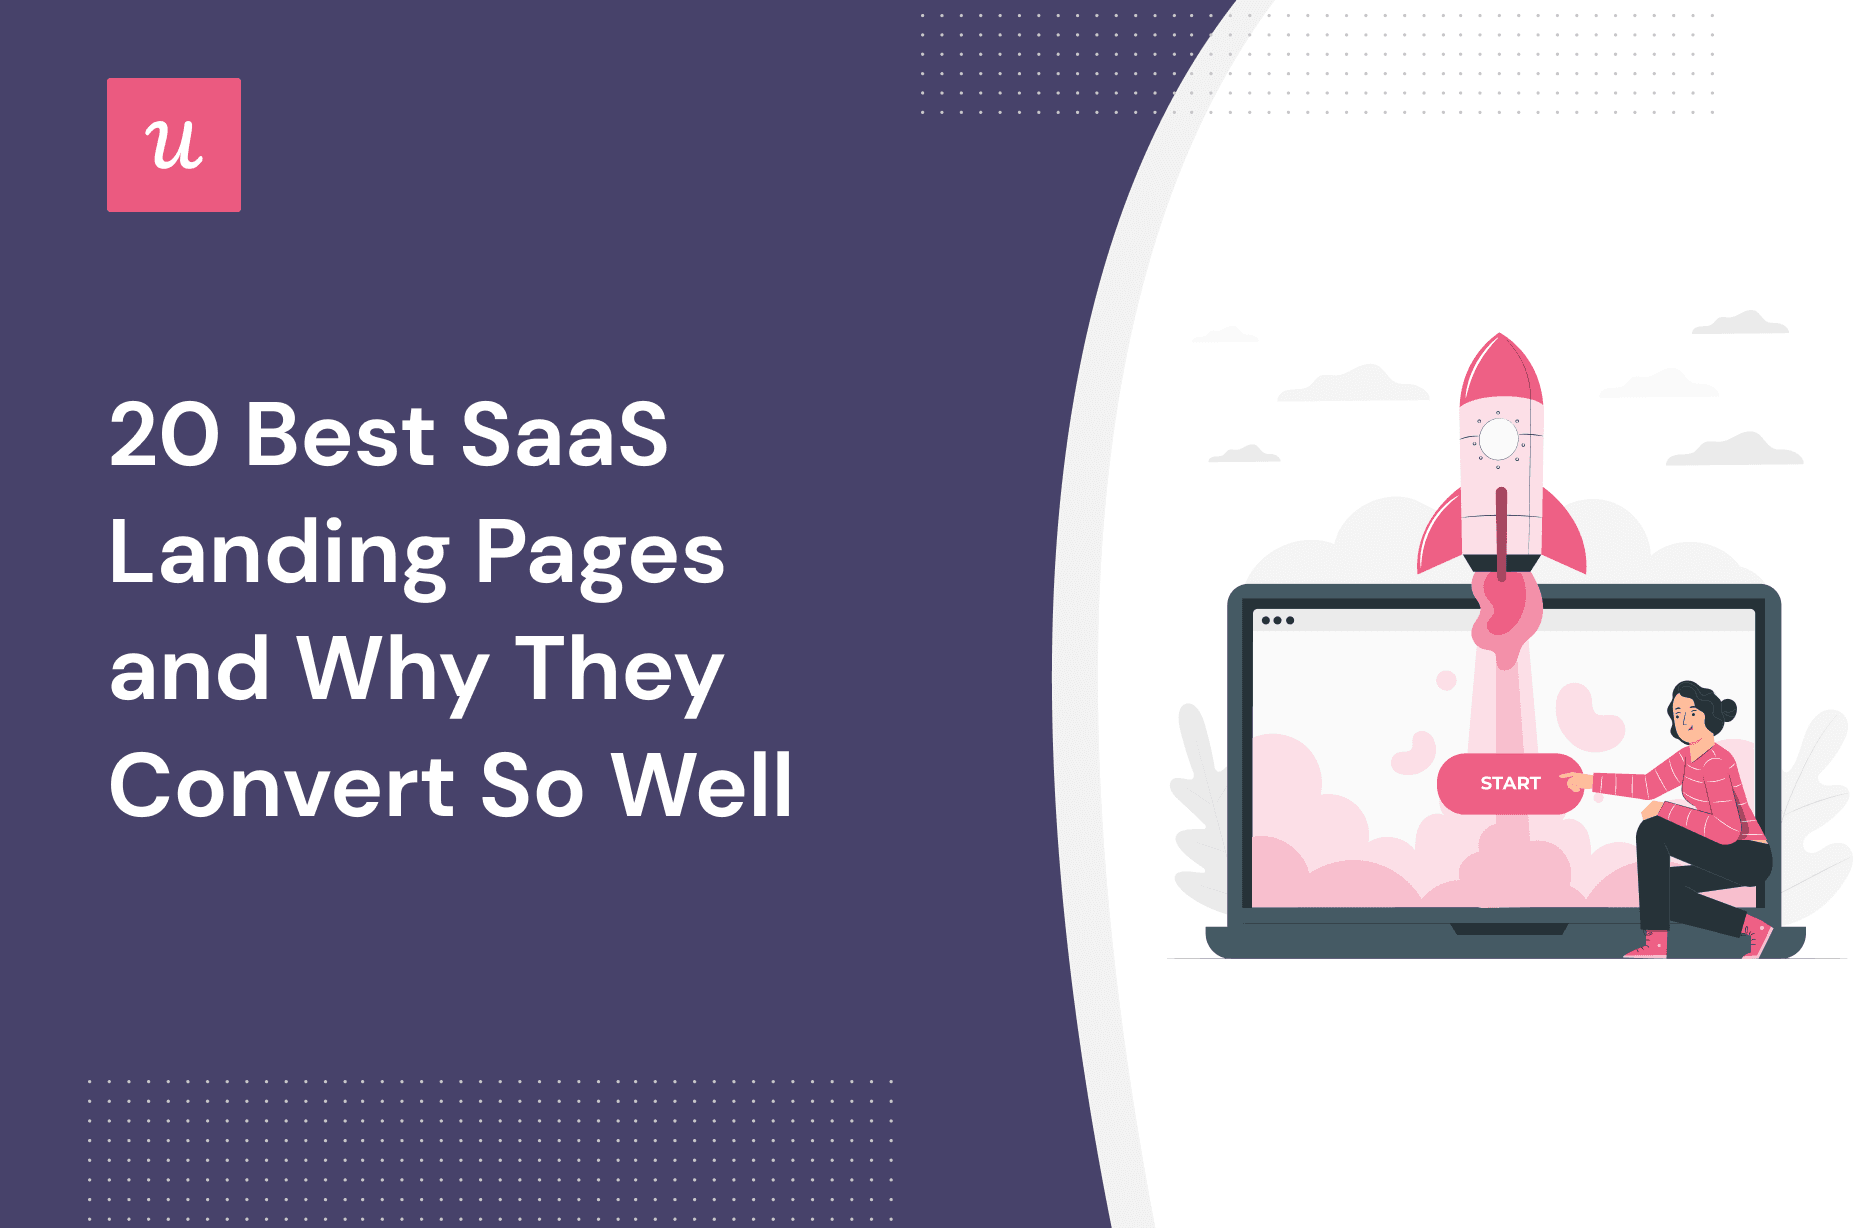 20 Best SaaS Landing Pages and Why They Convert So Well cover